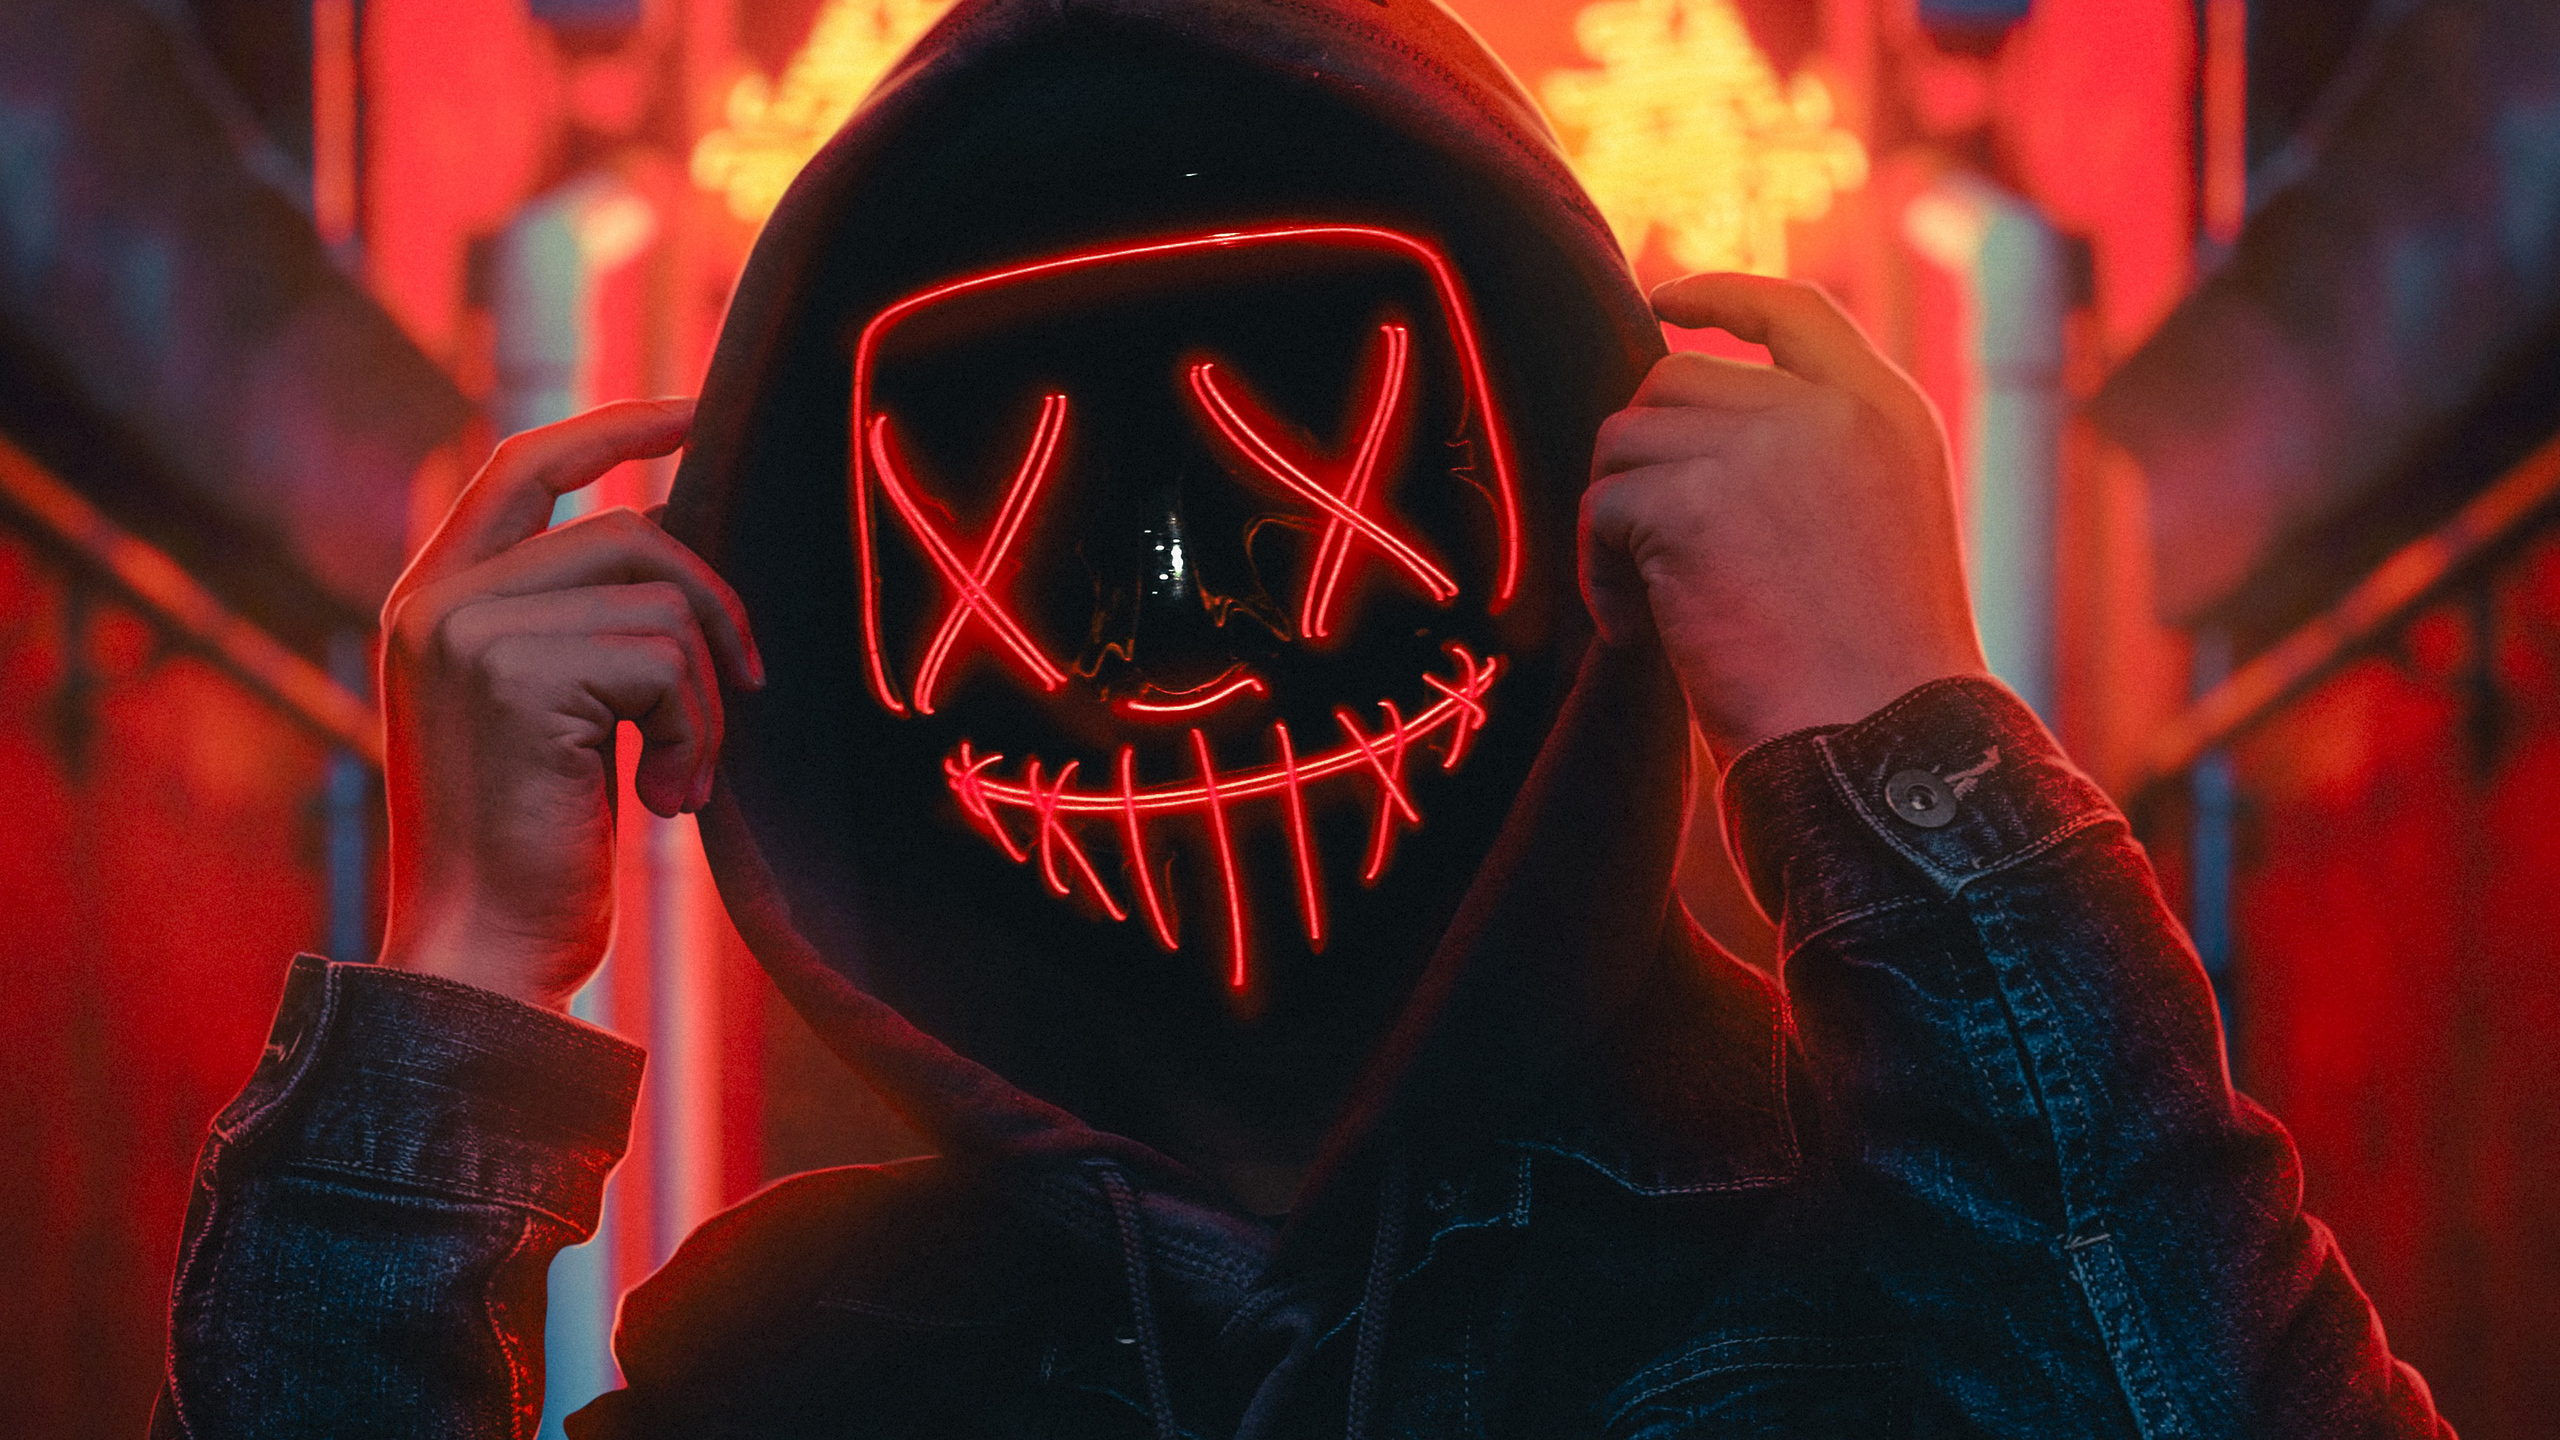 X hoodie guy red neon light k p resolution hd k wallpapers images backgrounds photos and pictures